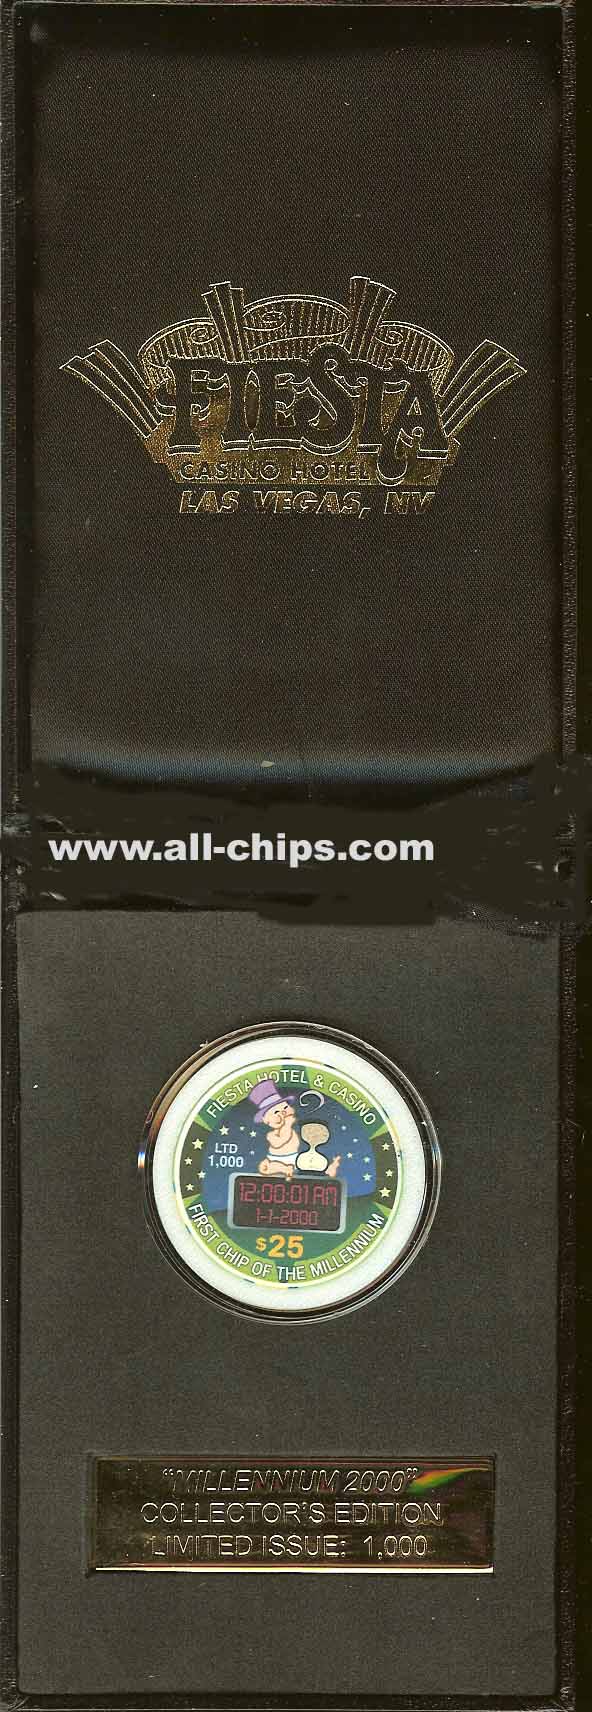 $25 Fiesta LTD W/ Box 1st and Last chip of the Millennium.(1 Chip with both on each side)